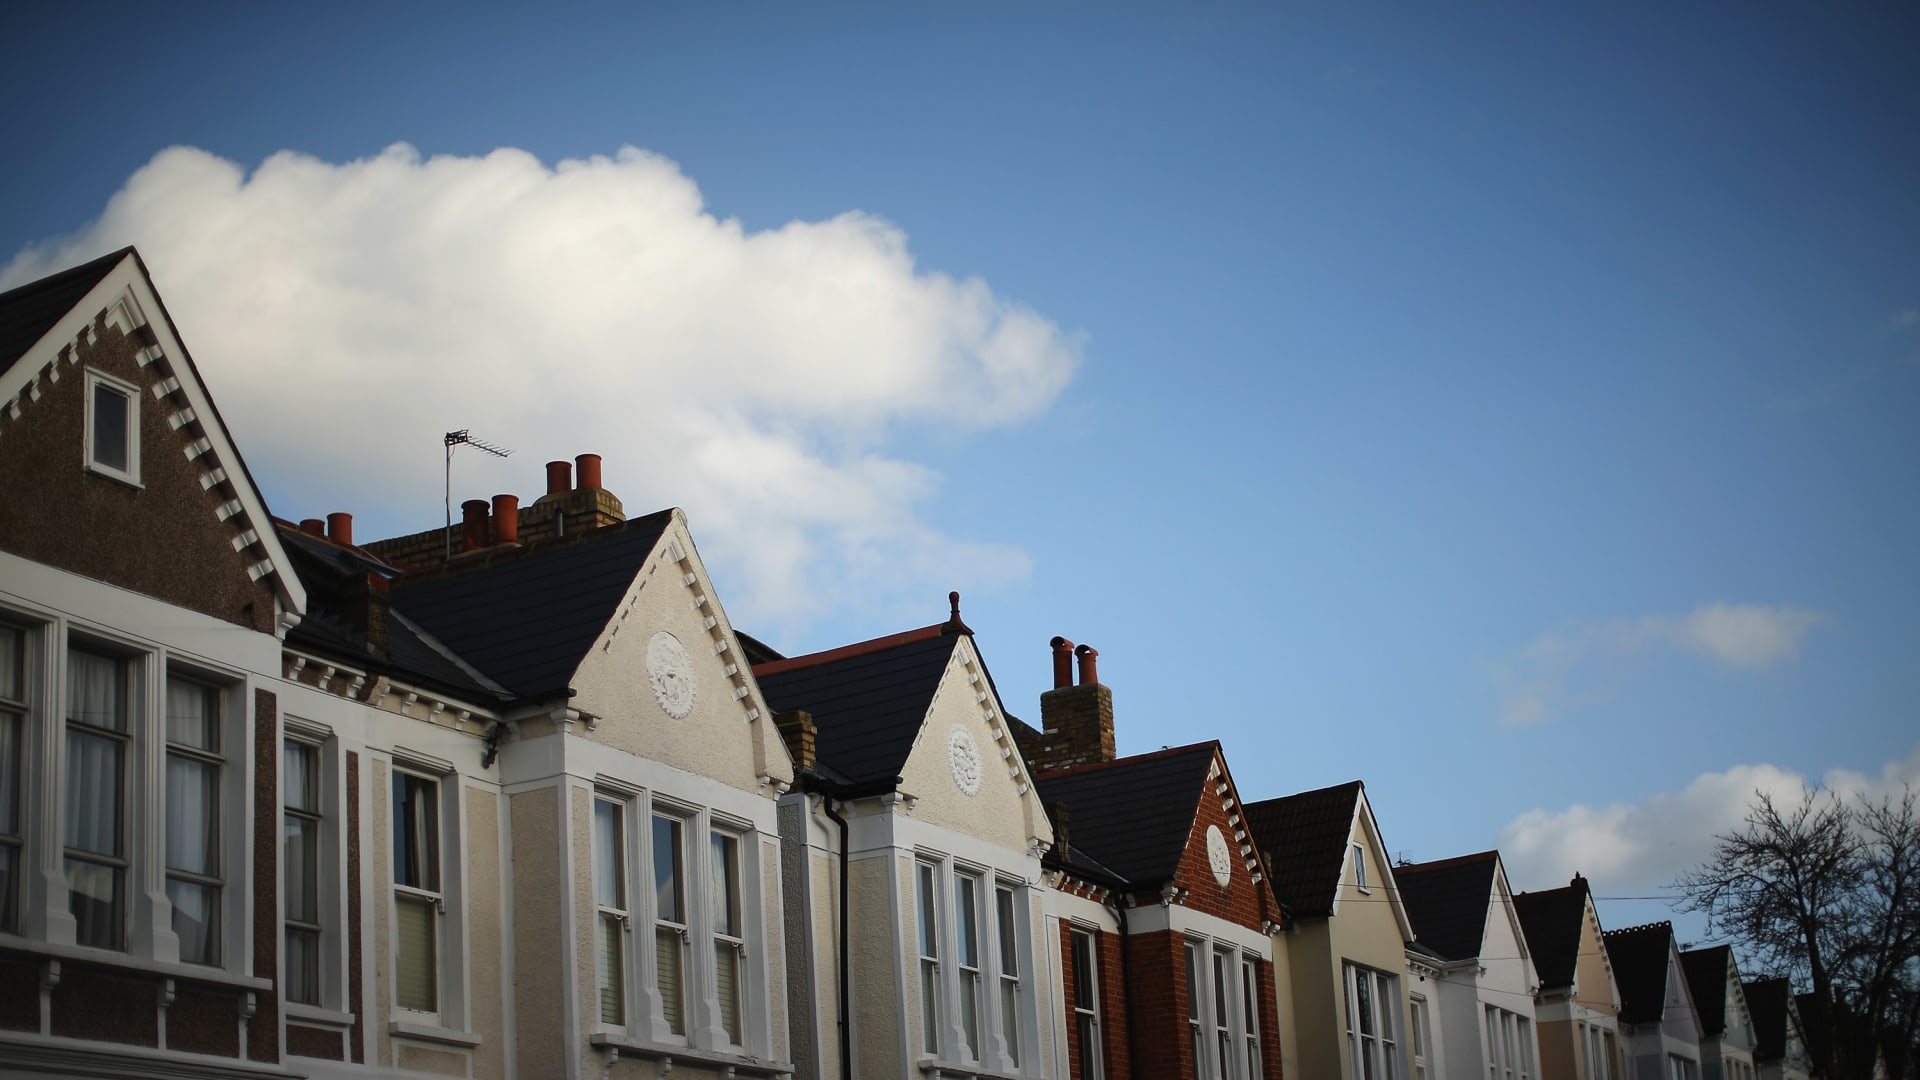 Mortgage catastrophe sparked fears of a housing market crash in the UK